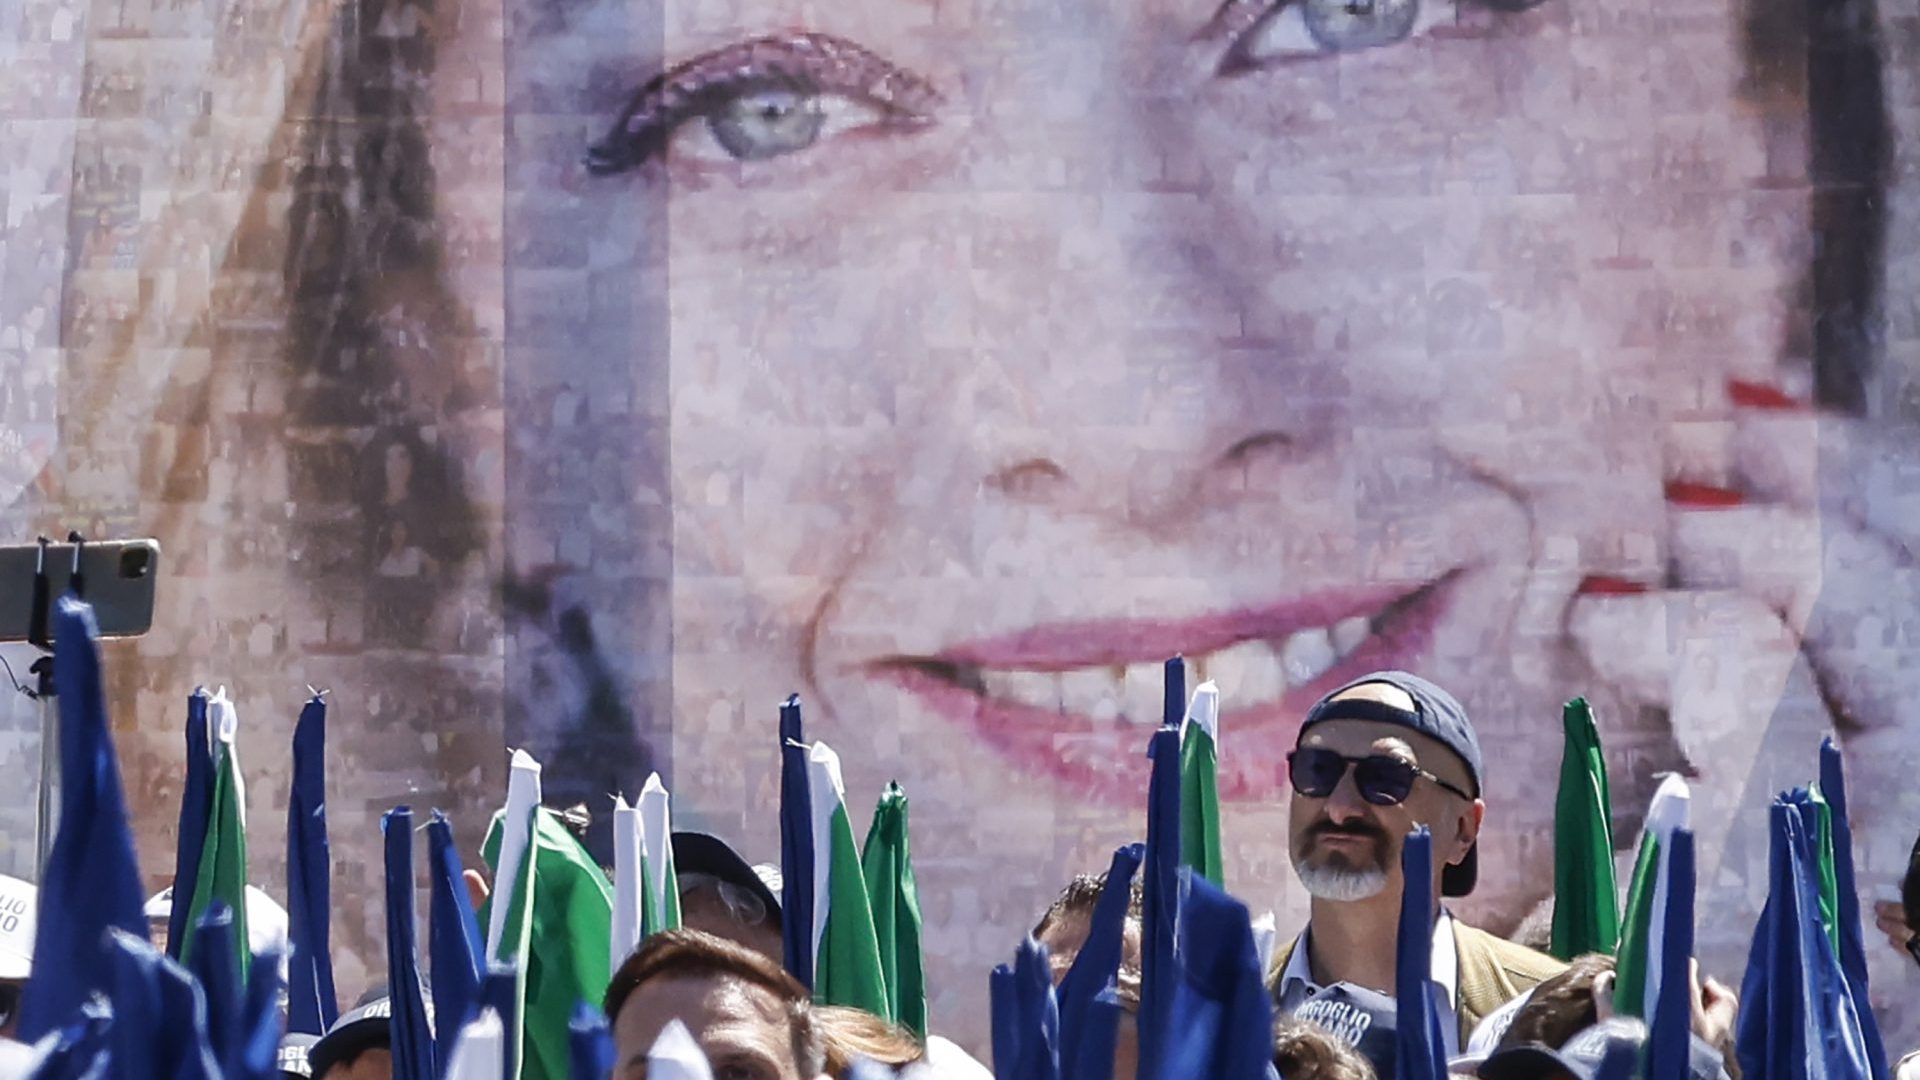 Fratelli d’Italia party supporters attend a gathering in Rome ahead of the European elections. Photo: Riccardo De Luca/Anadolu/Getty